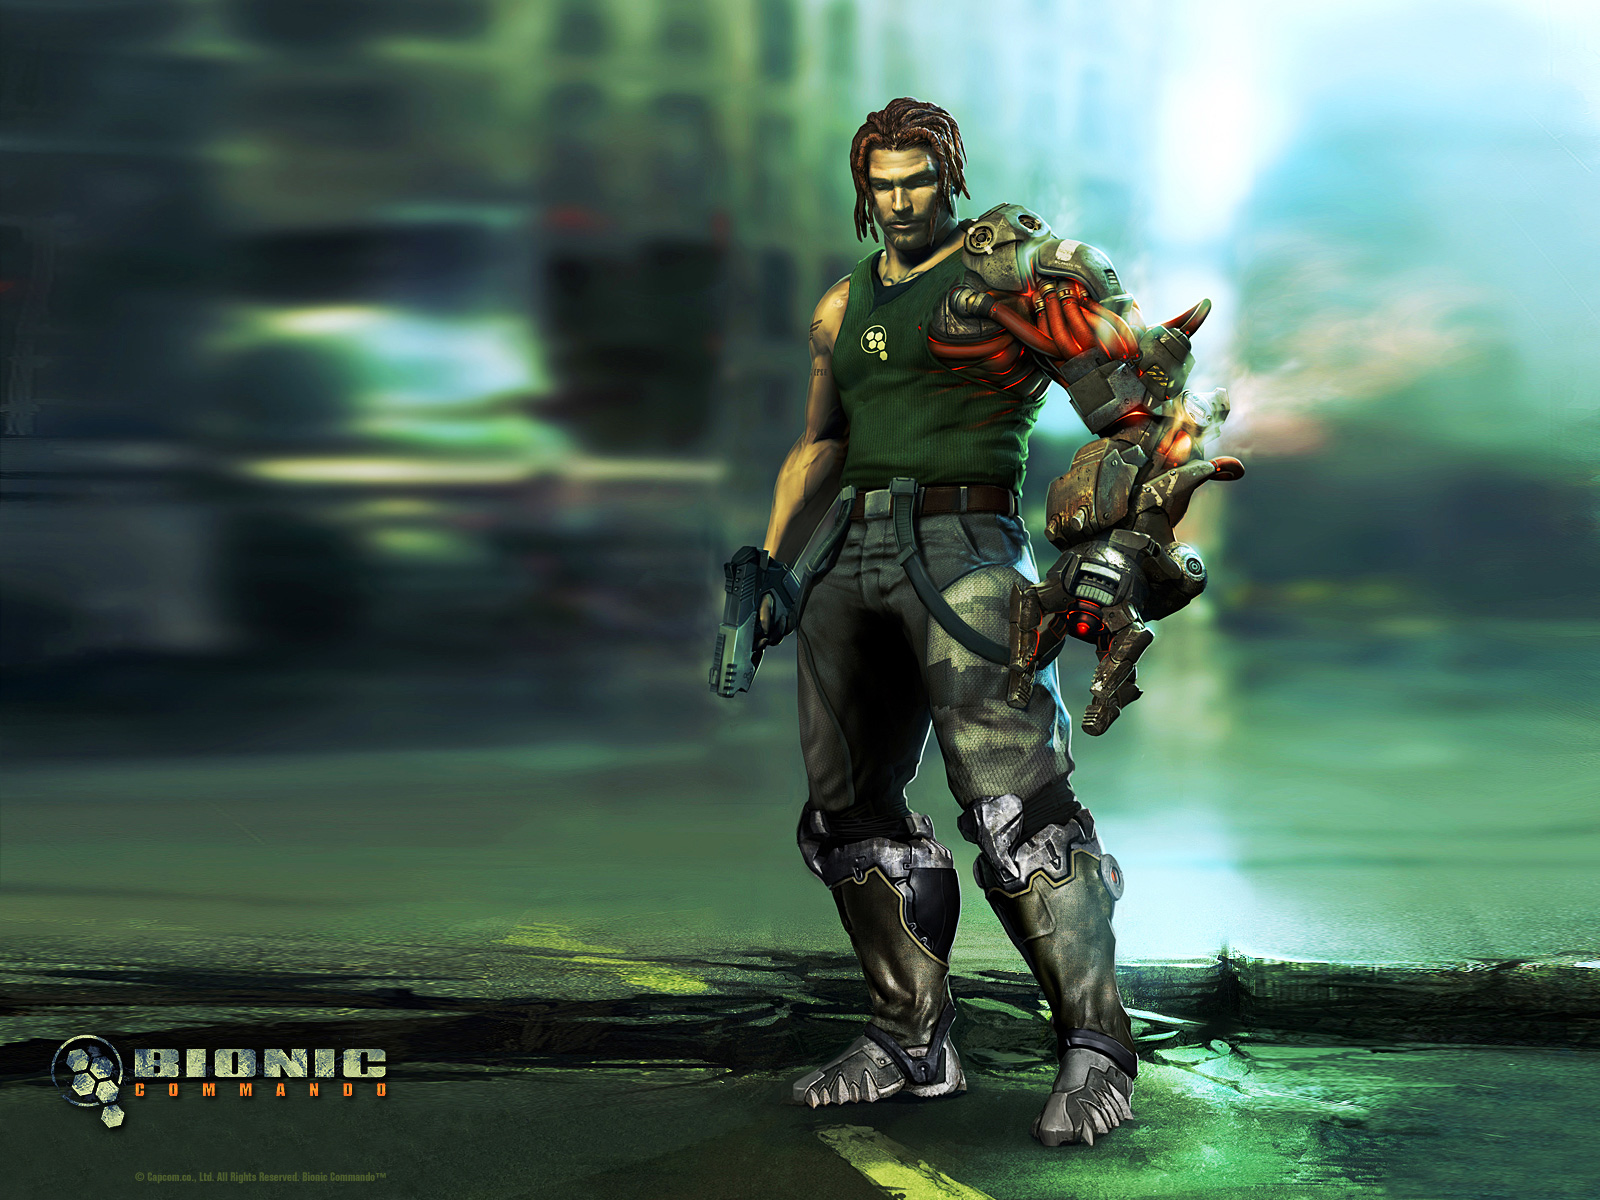 Bionic Commando | Free Desktop Wallpapers for HD, Widescreen and ...